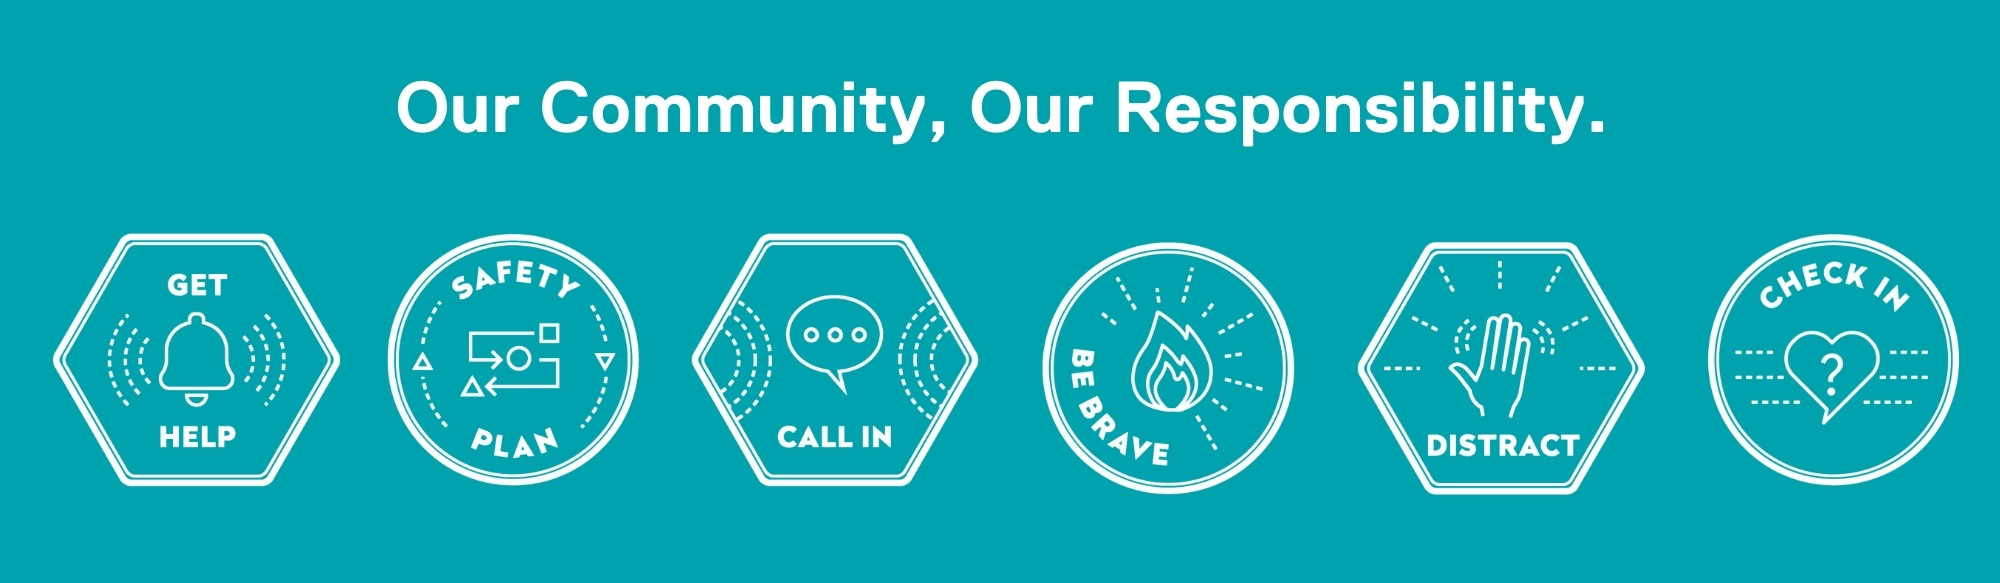 Graphic of 6 white bystander intervention badges on a teal background with the text "our community, our responsibility." at the top.